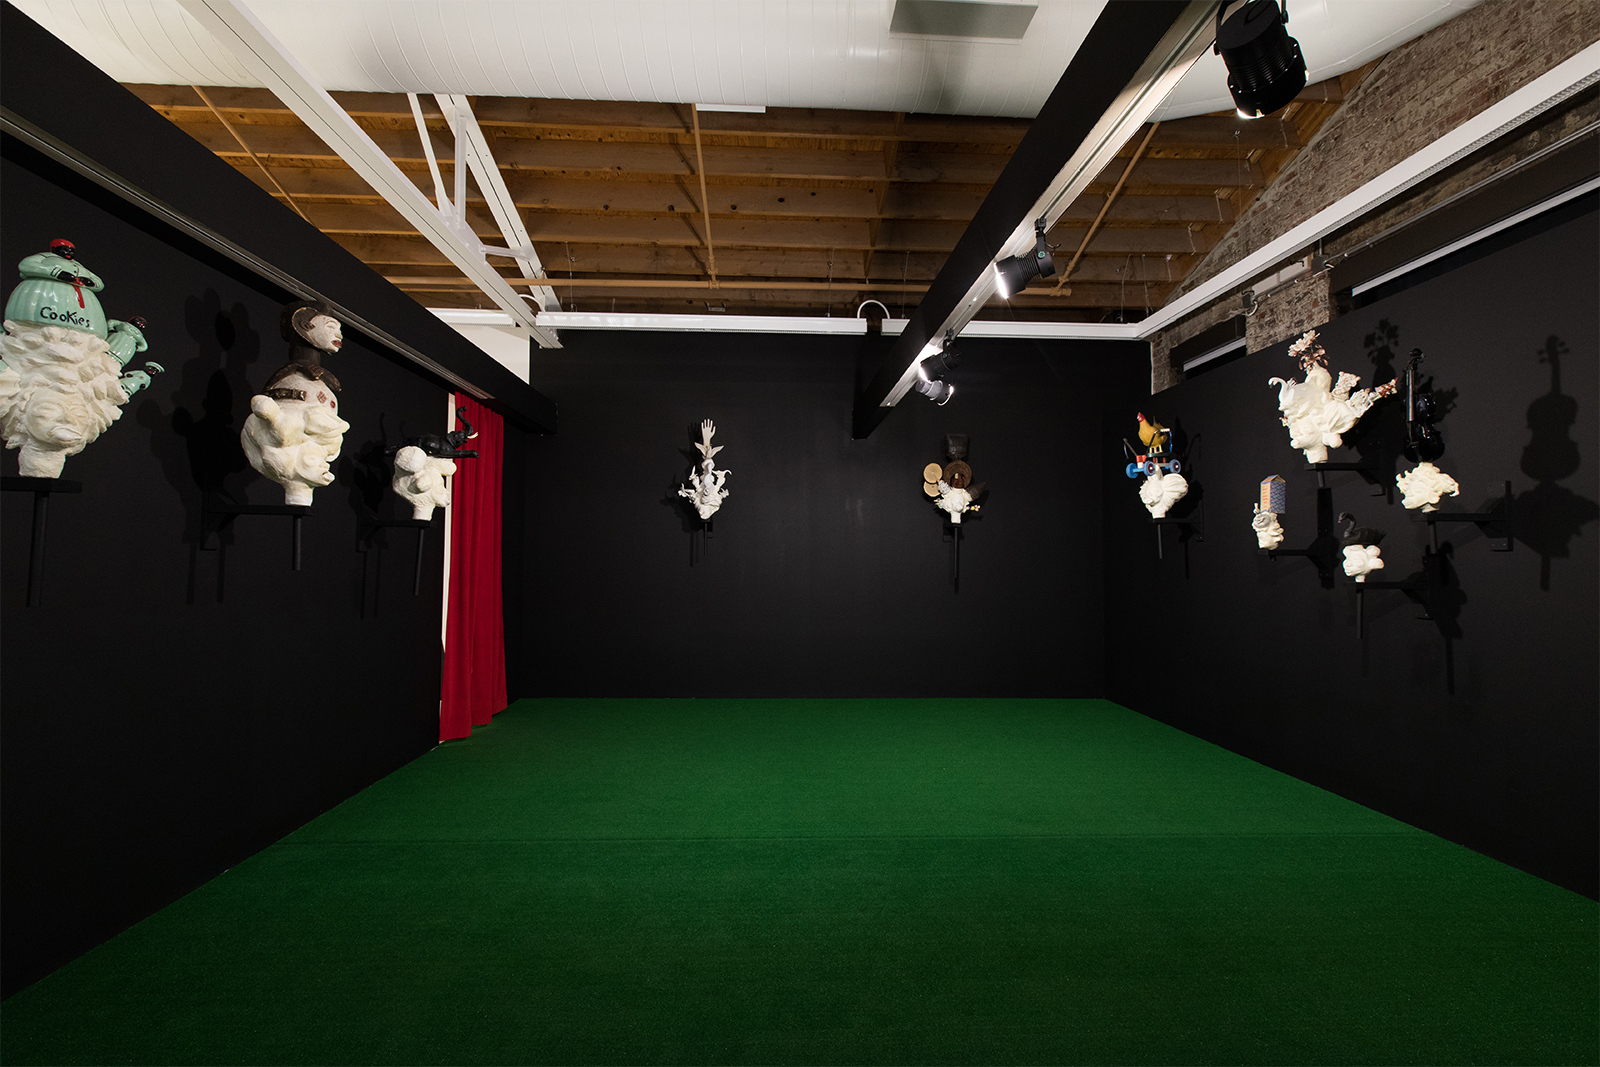 Vanessa German - antechamber to exhibit, black painted walls, green Astroturf on the floor, eight white sculpted heads hanging on the walls, and red curtains leading to the main exhibit.